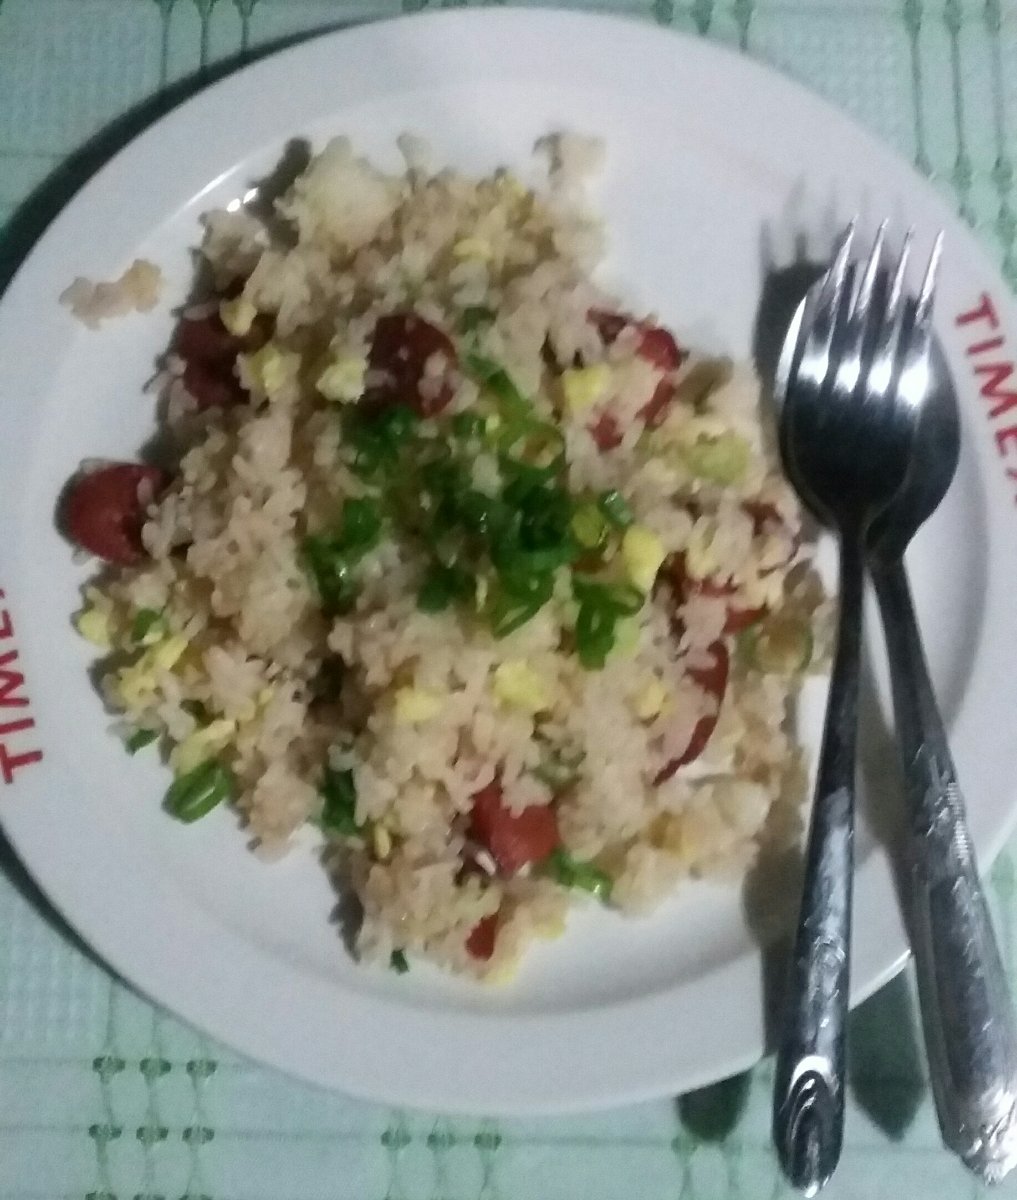 Specialty for my brother, fried rice with green onions